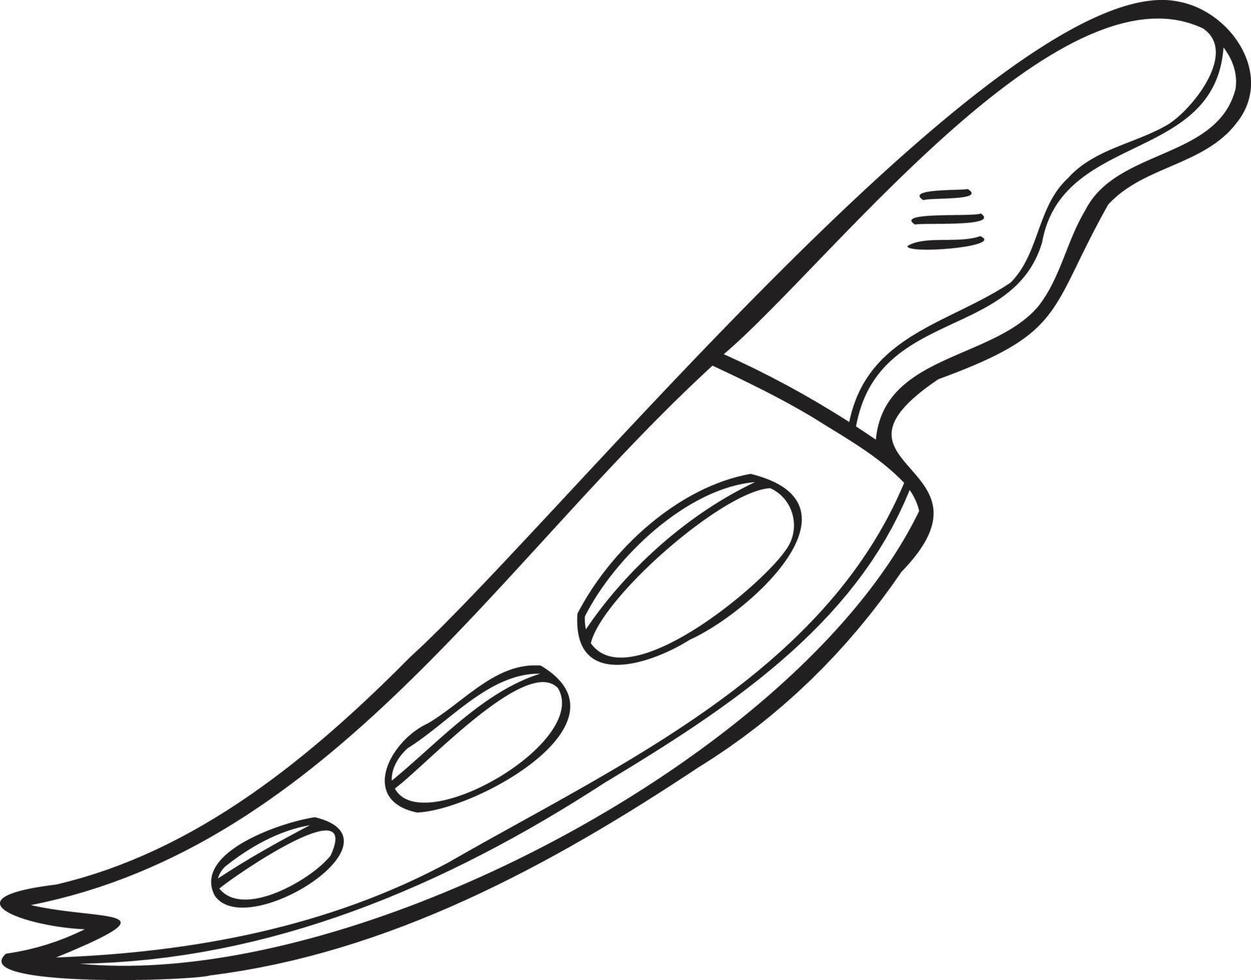 Hand Drawn cheese knife illustration in doodle style vector